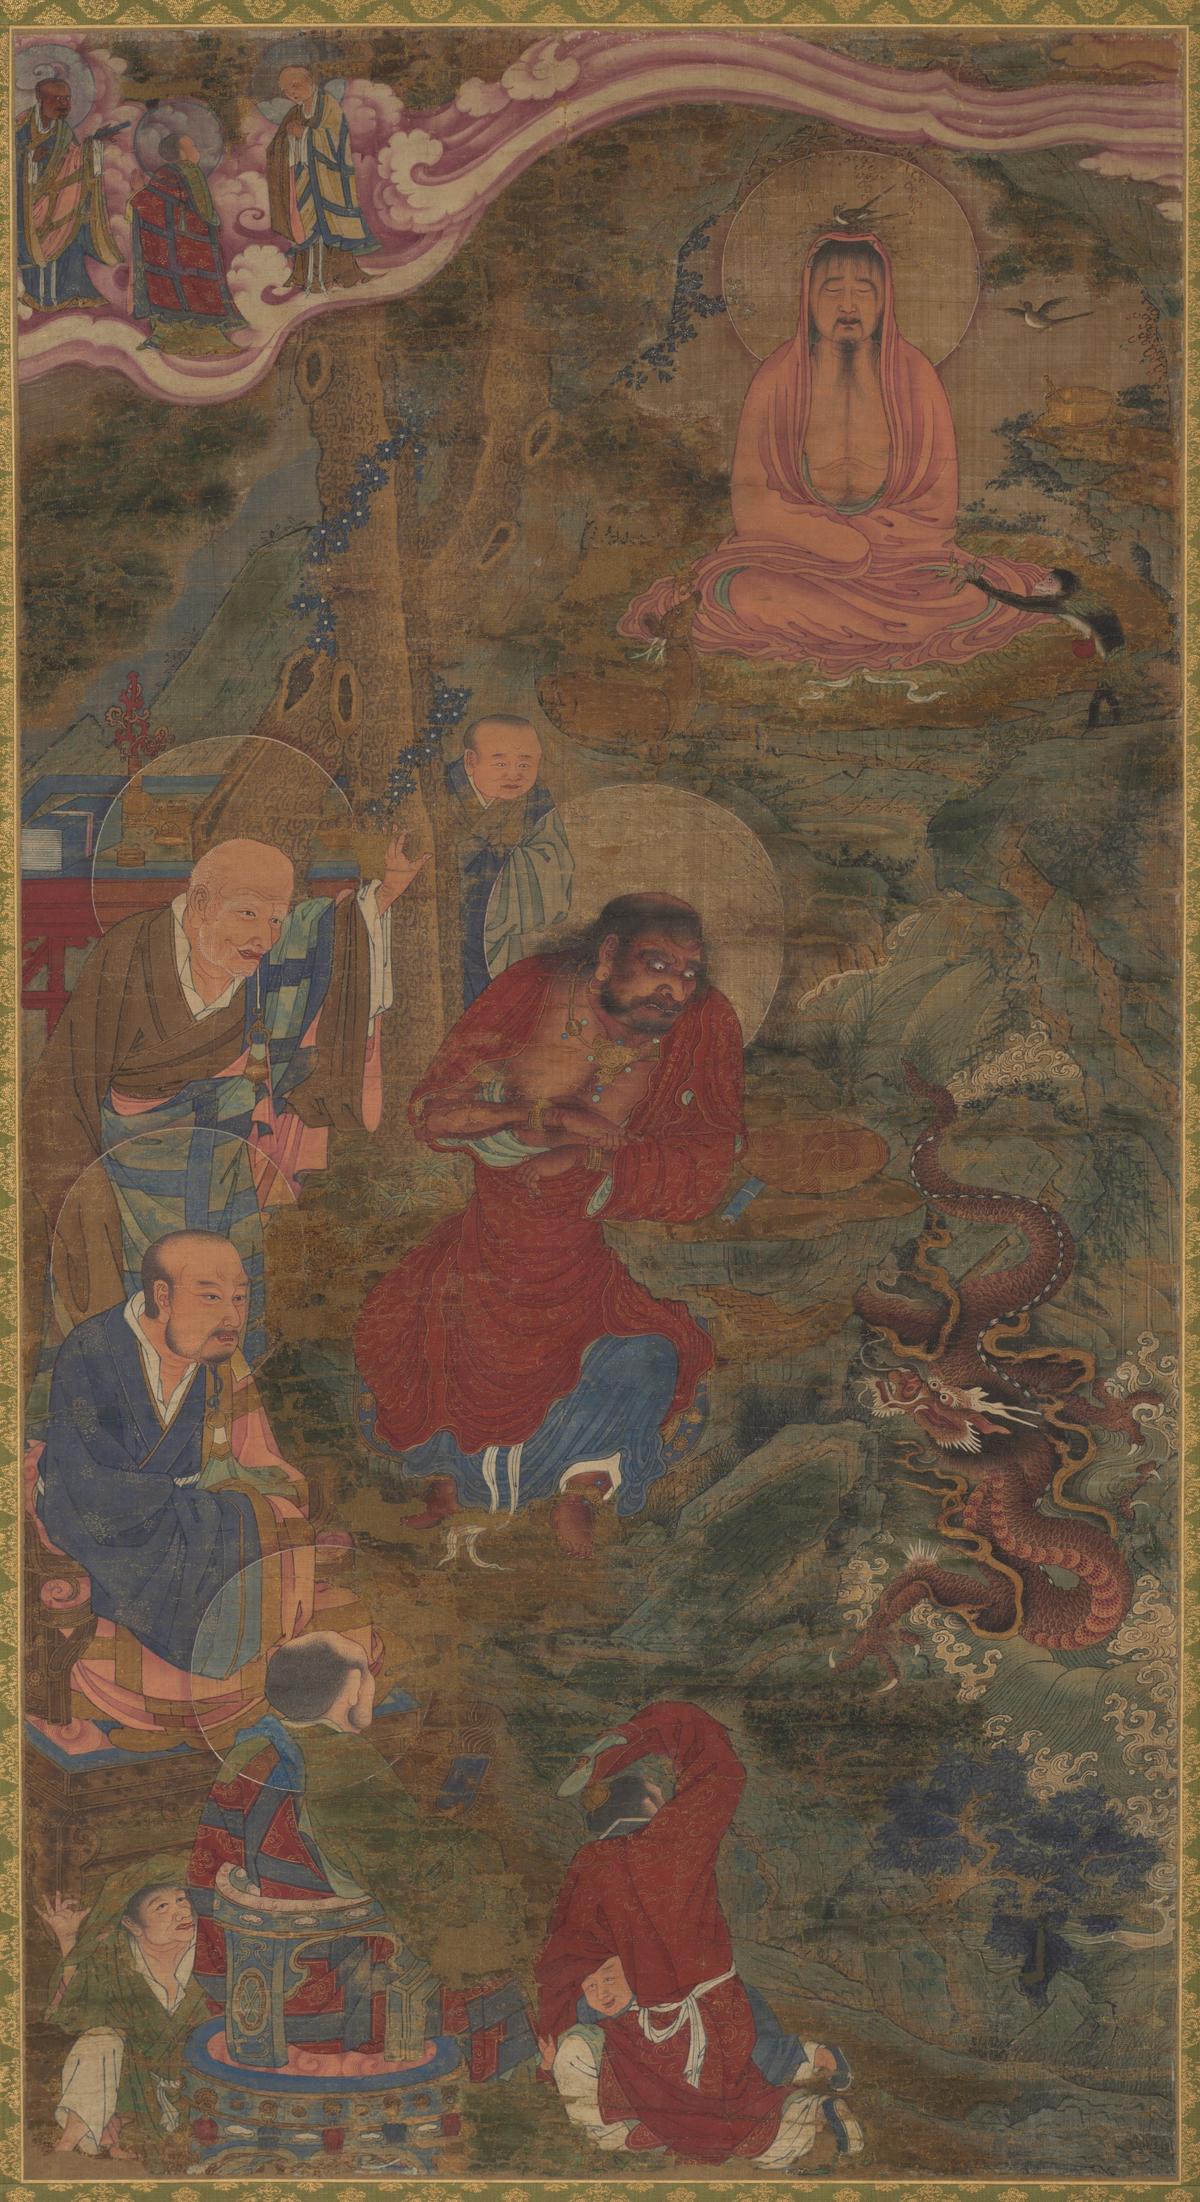 Buddhist disciples grouped around a dragon, the symbol of enlightenment, with Buddha Shakyamuni sitting in meditation at the upper right of the hanging scroll. "Miracle of the Dragon," 1600s, by a Ming dynasty artist. Hanging scroll, ink, color, and gold on silk. Cleveland Museum of Art. (Public Domain)